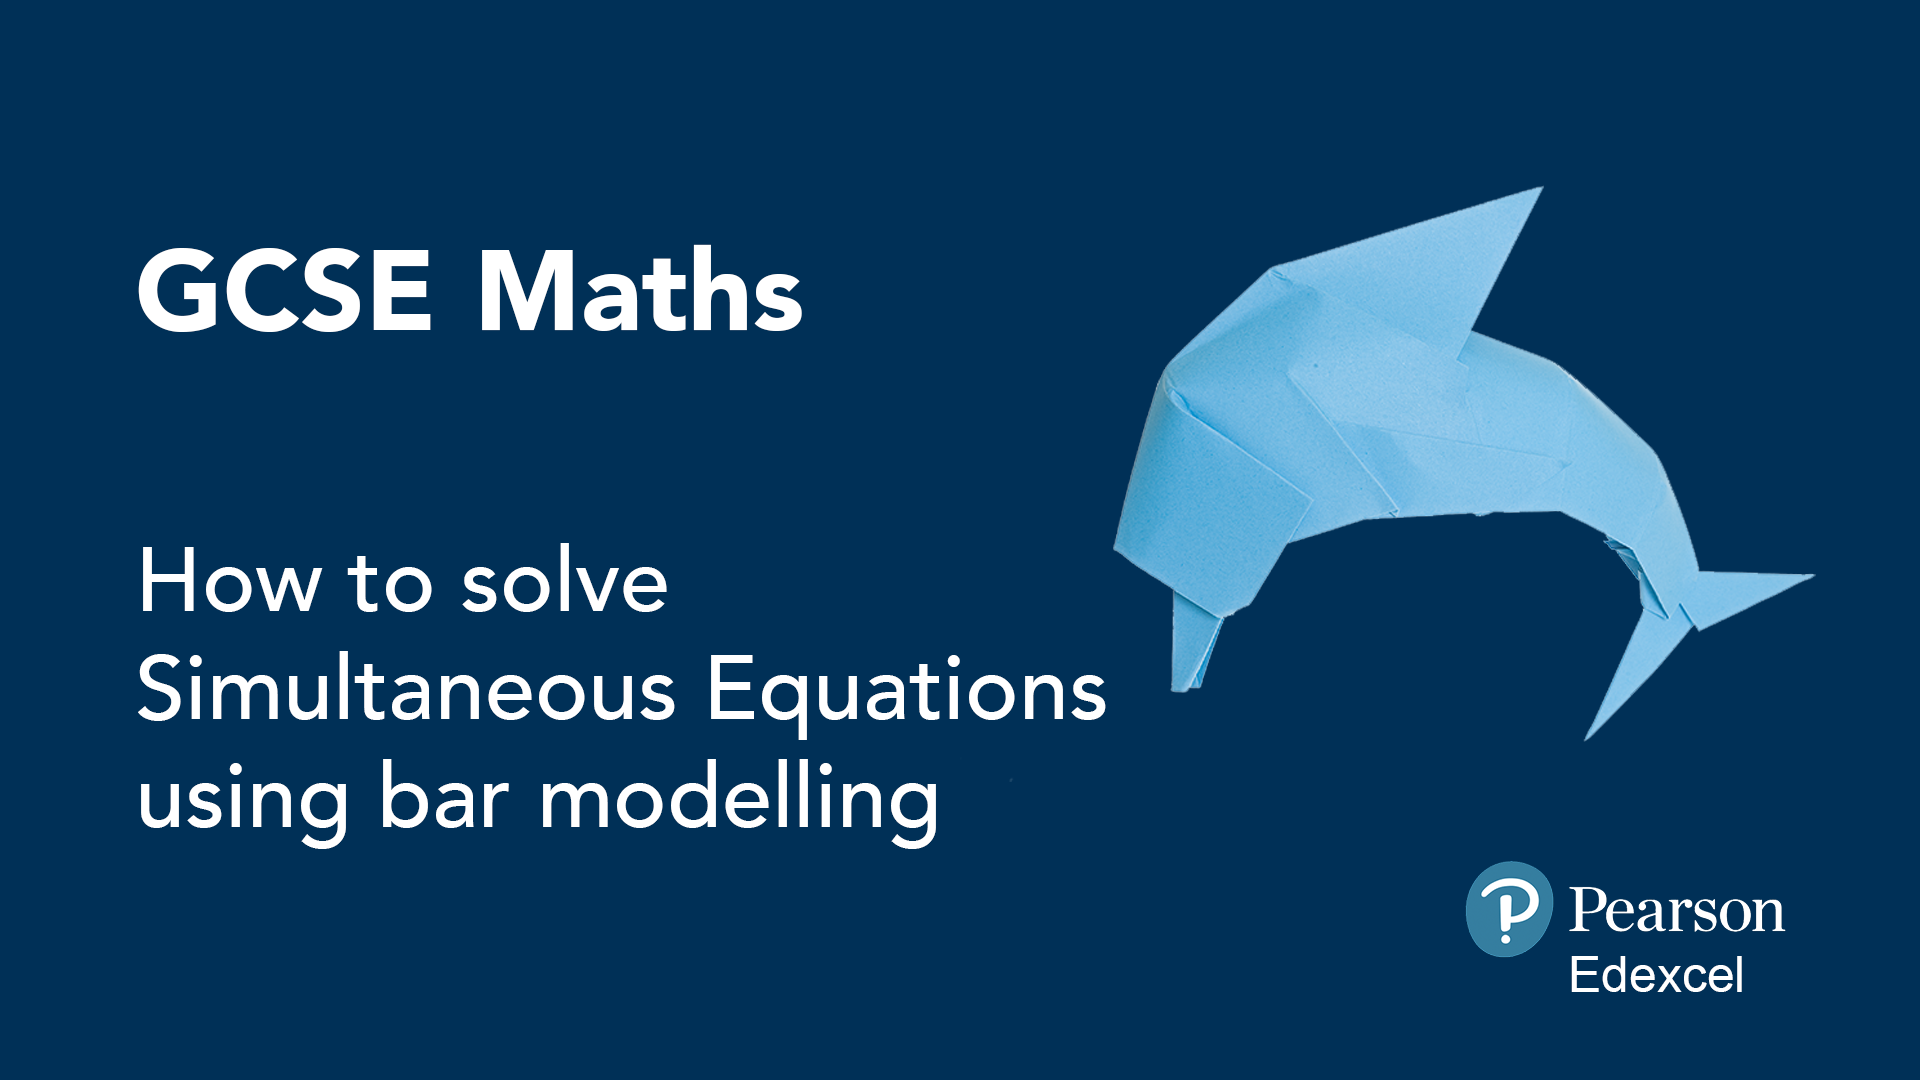 GCSE Maths: How to solve simultaneous equations using bar modelling